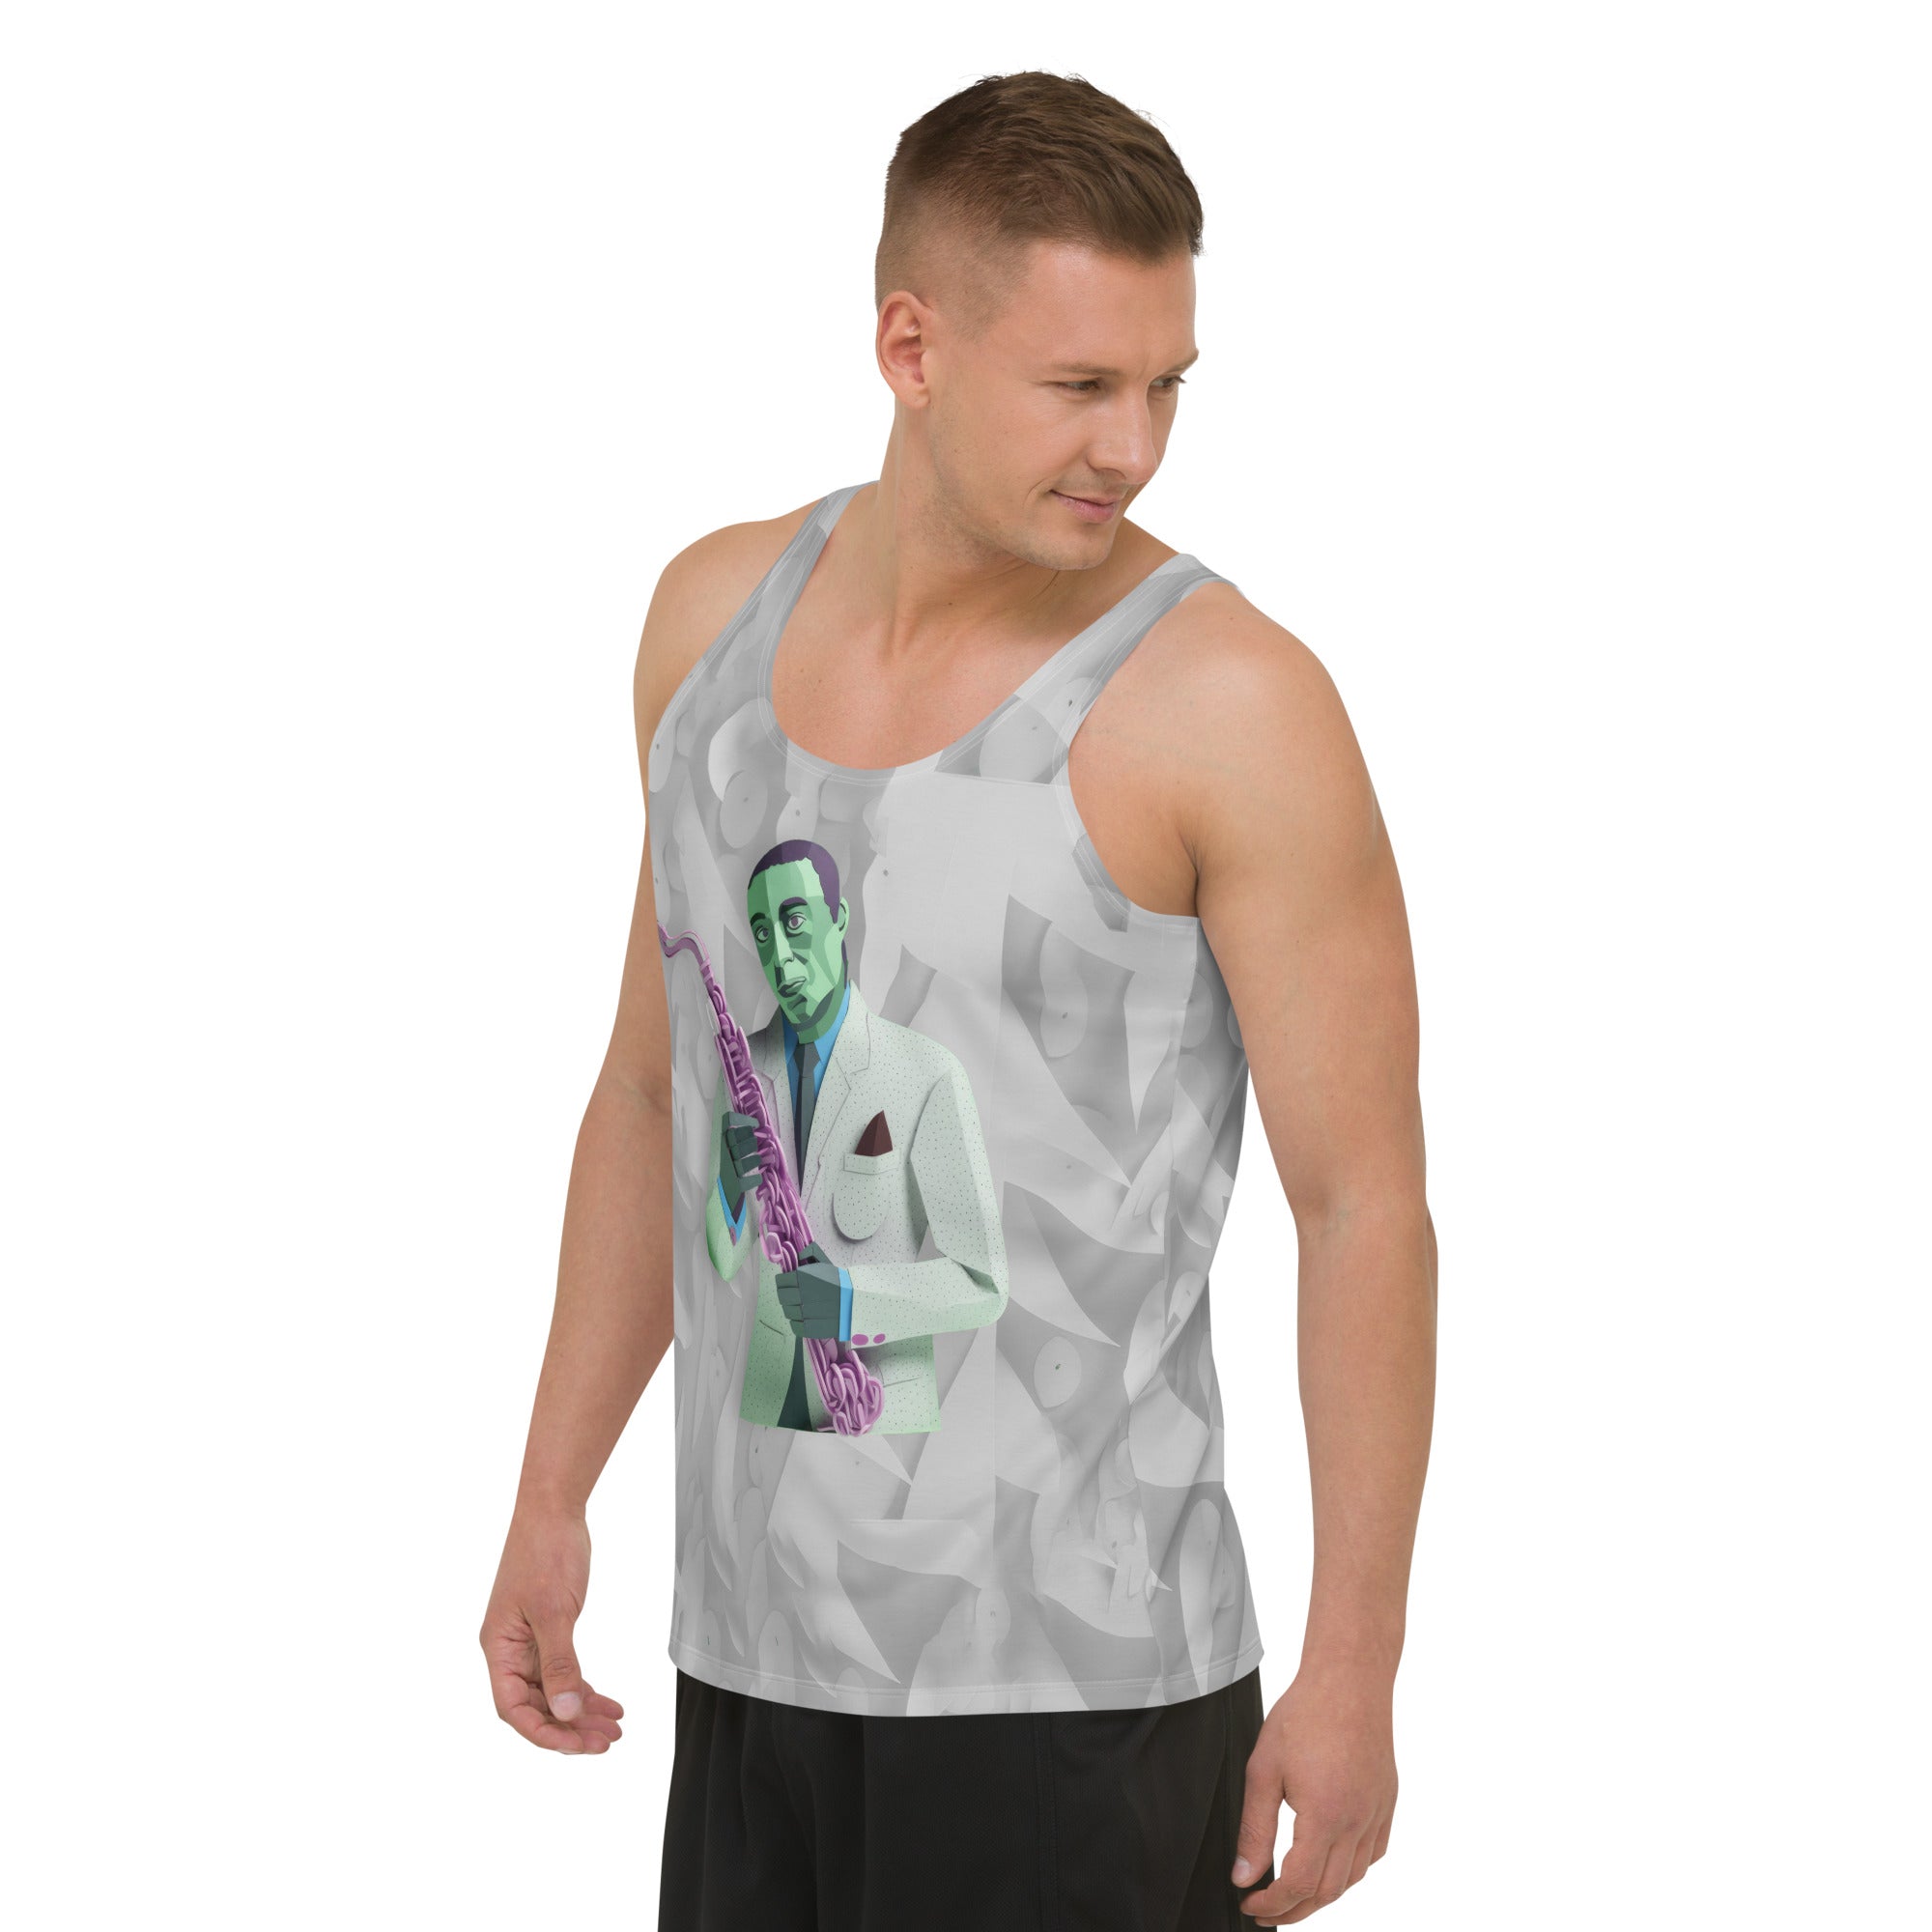 Stylish men's jazz fusion tank top in breathable fabric.